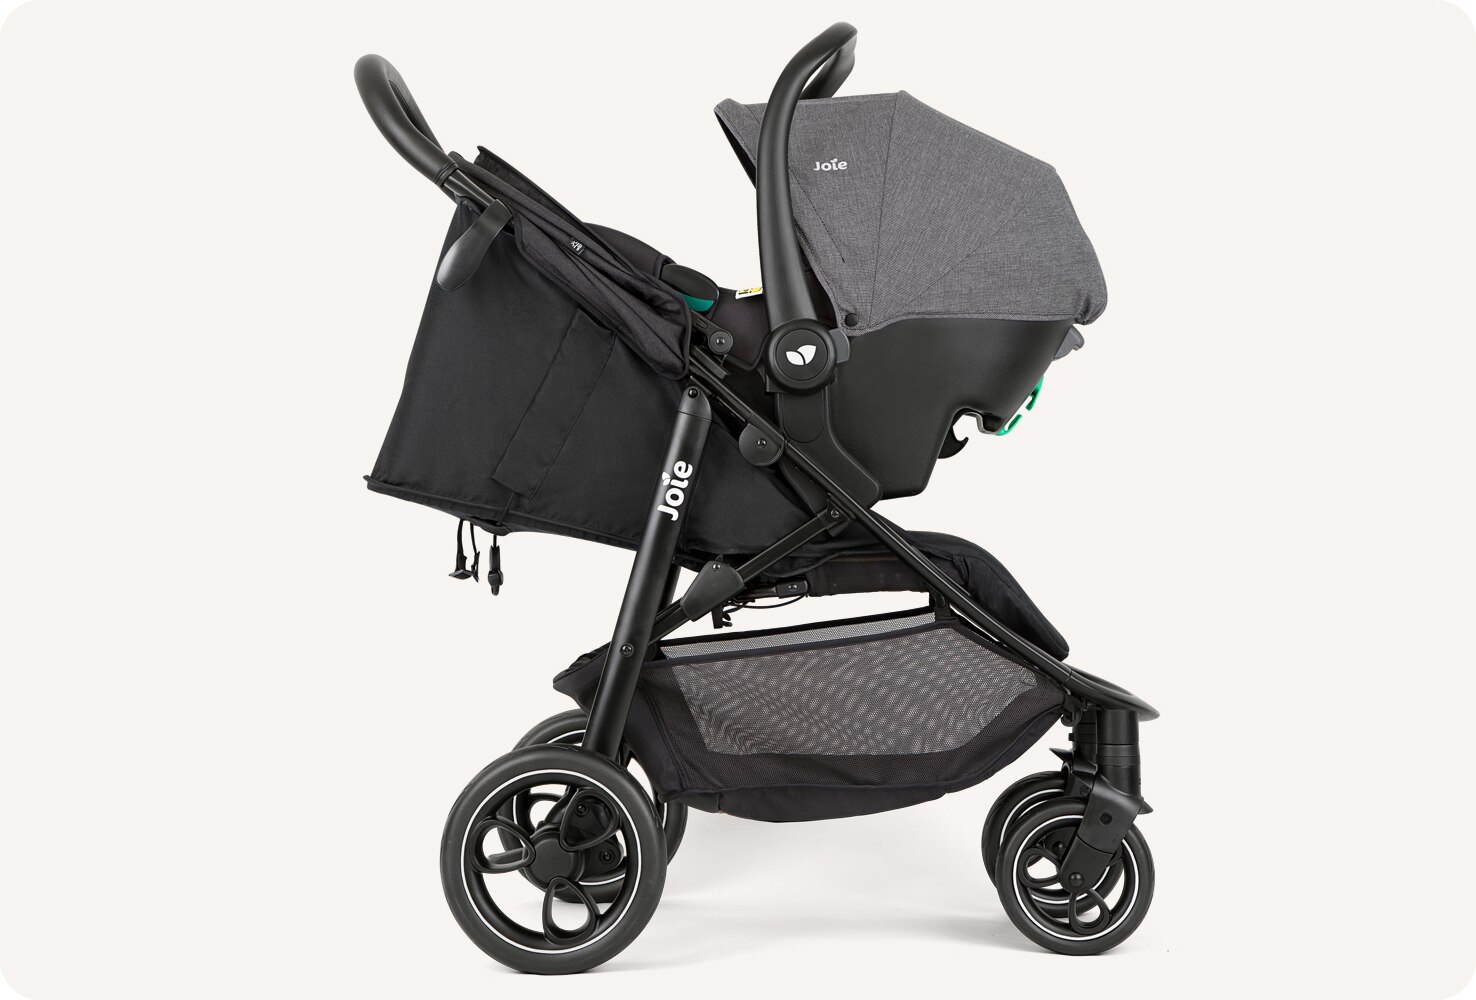  JoIe black litetrax S stroller with infant carrier. 